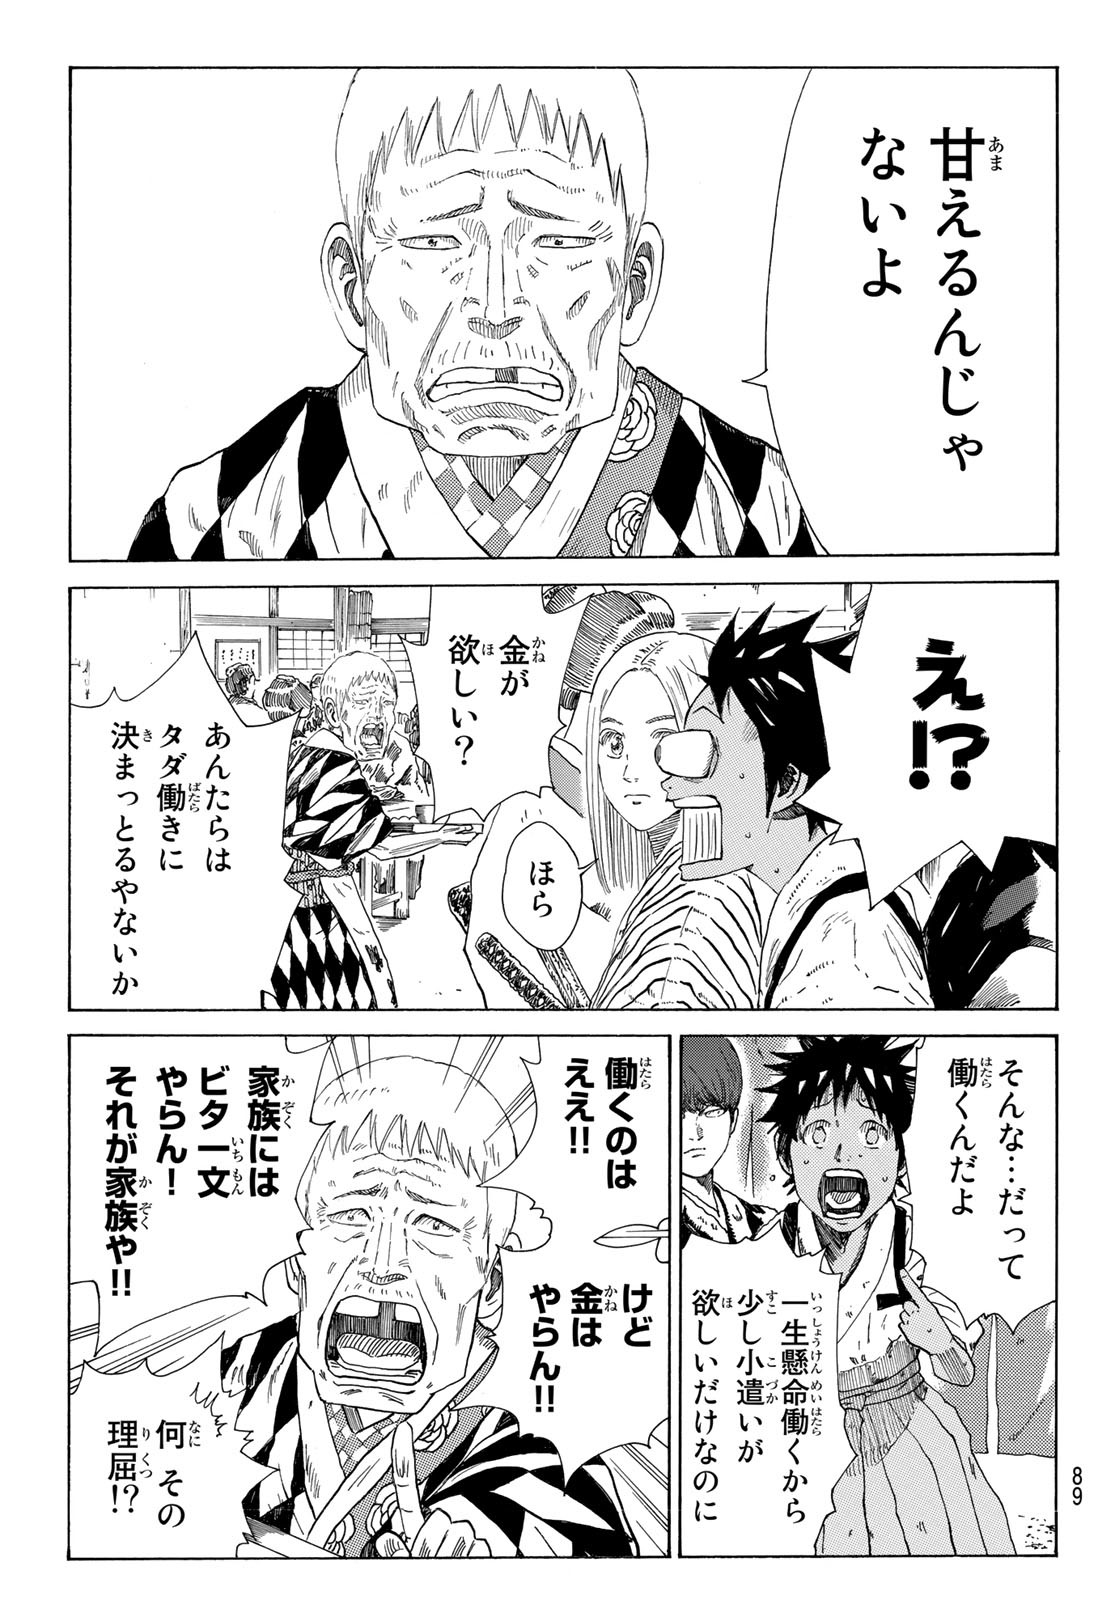 An Mo Miburo 第41話 - Page 4